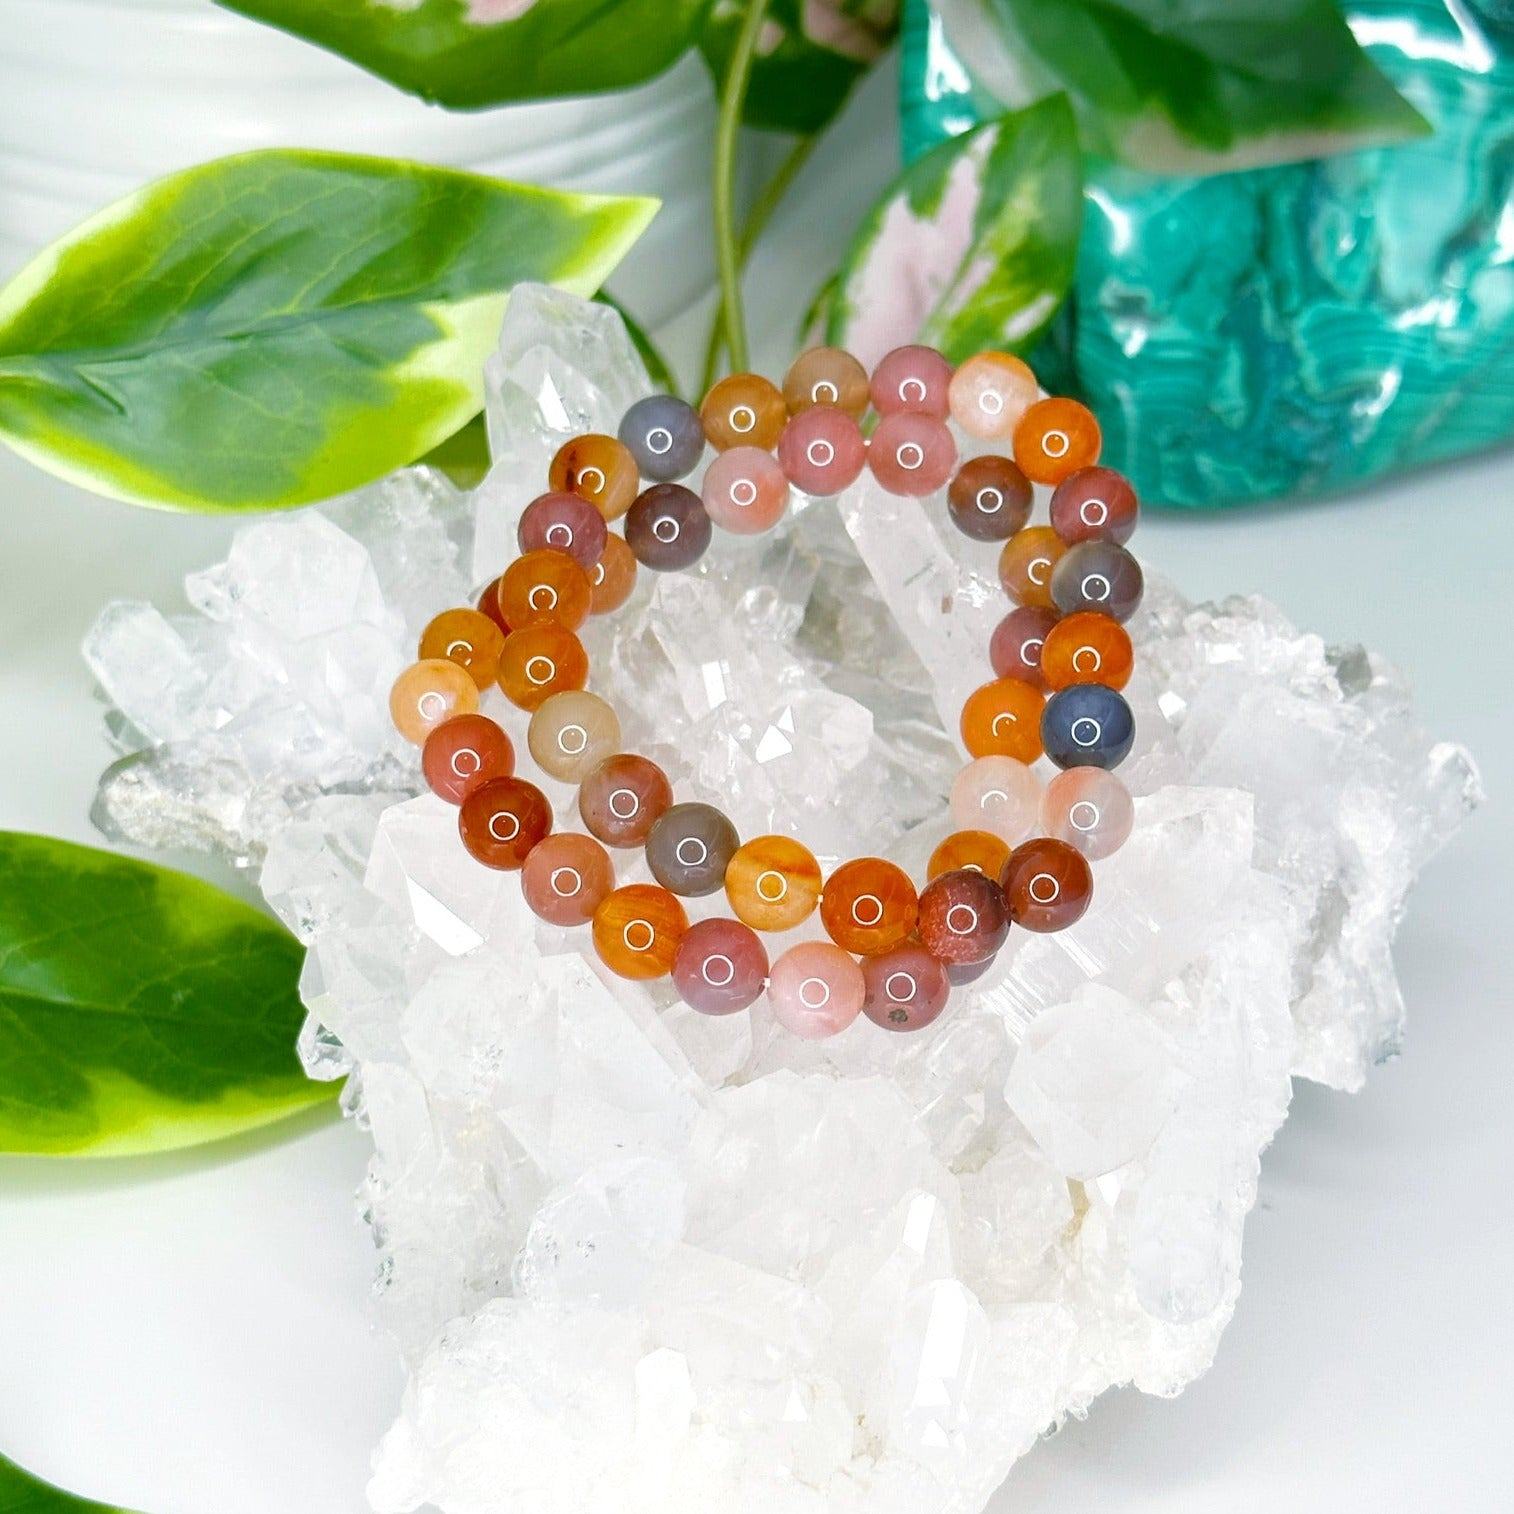 AFRICAN RED AGATE 8mm - HANDMADE CRYSTAL BRACELET - 8mm, African agate, African red agate, agate, bracelet, crystal bracelet, emotional support, fall-o-ween, fall-o-ween bracelets, fire, gemini, handmade bracelet, jewelry, market bracelet, recently added, red agate, swazi agate, Wearable - The Mineral Maven